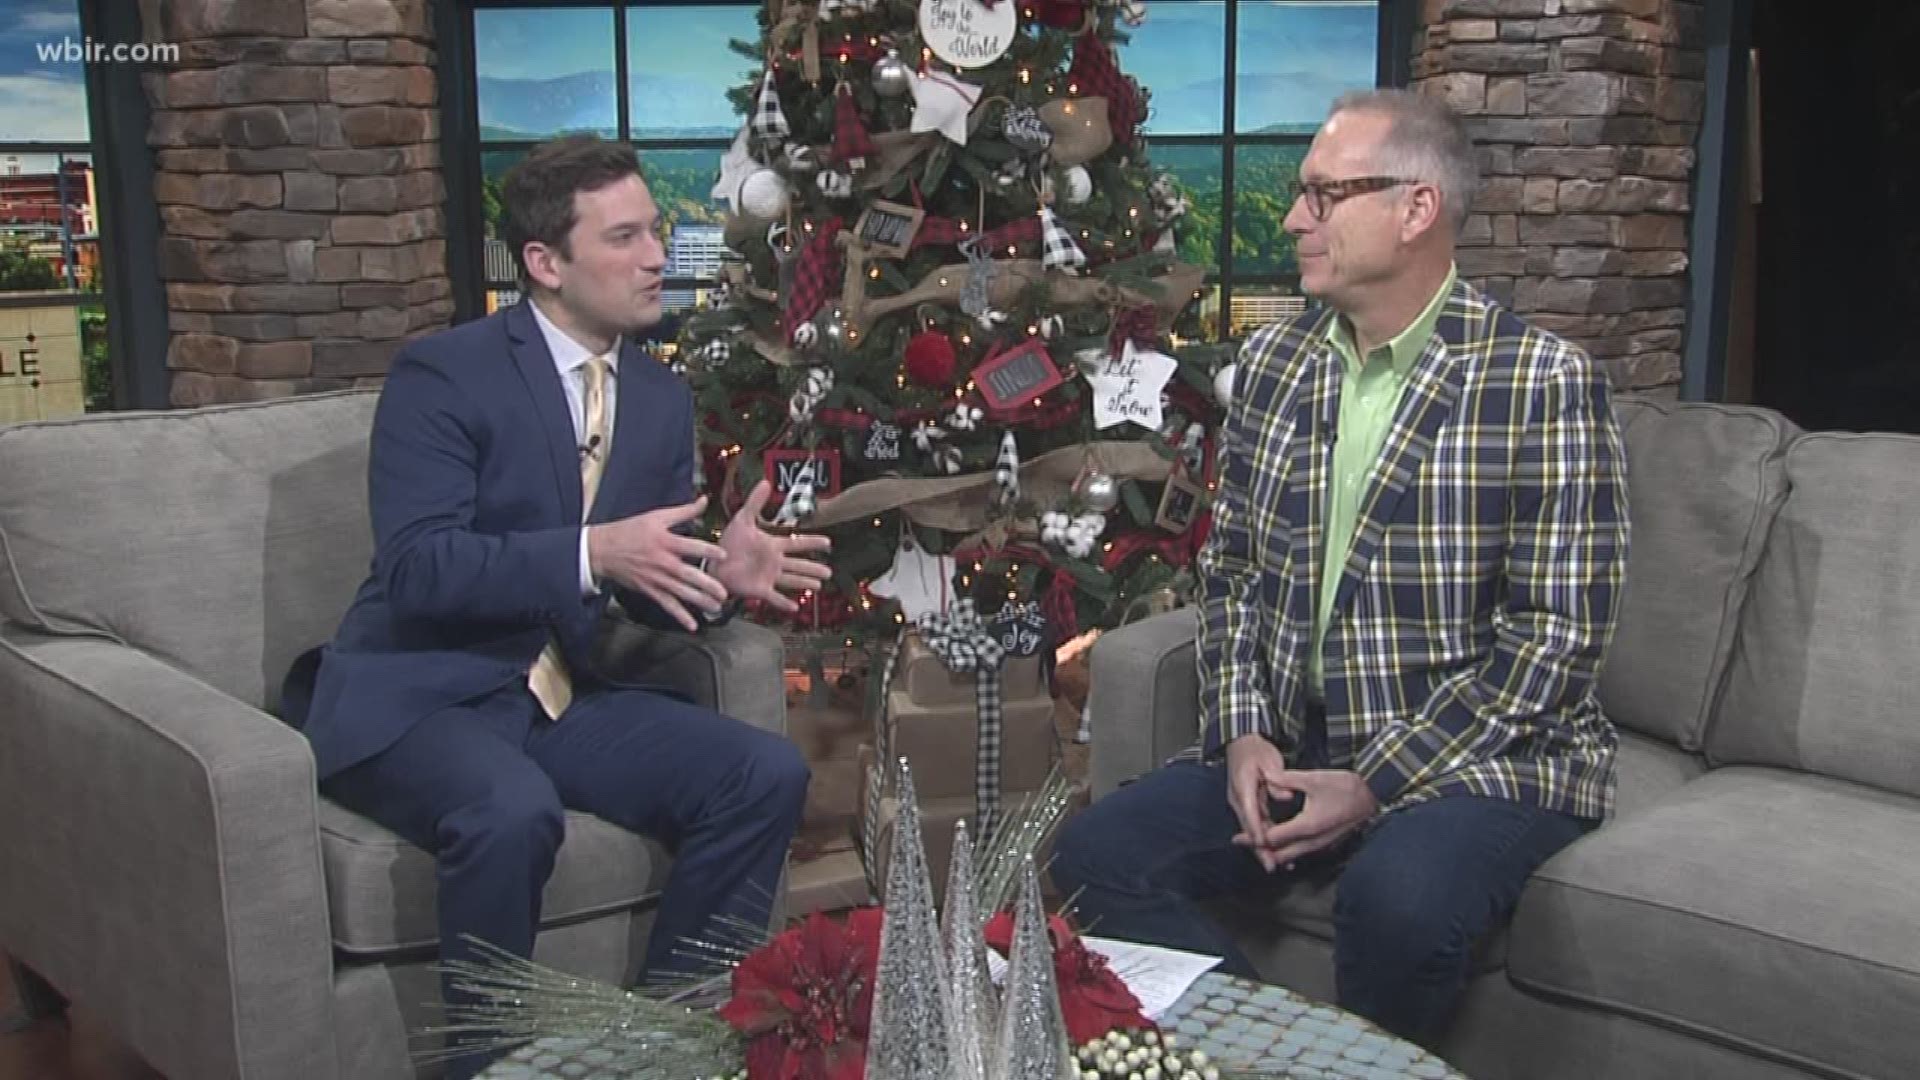 Moneyman Paul Fain with Asset Planning Corporation joins 10News to talk about tipping during the holiday season. Whom should you tip? How much should you give them? 

If you tip everyone, that gets expensive. Create a budget based on who impacts your life